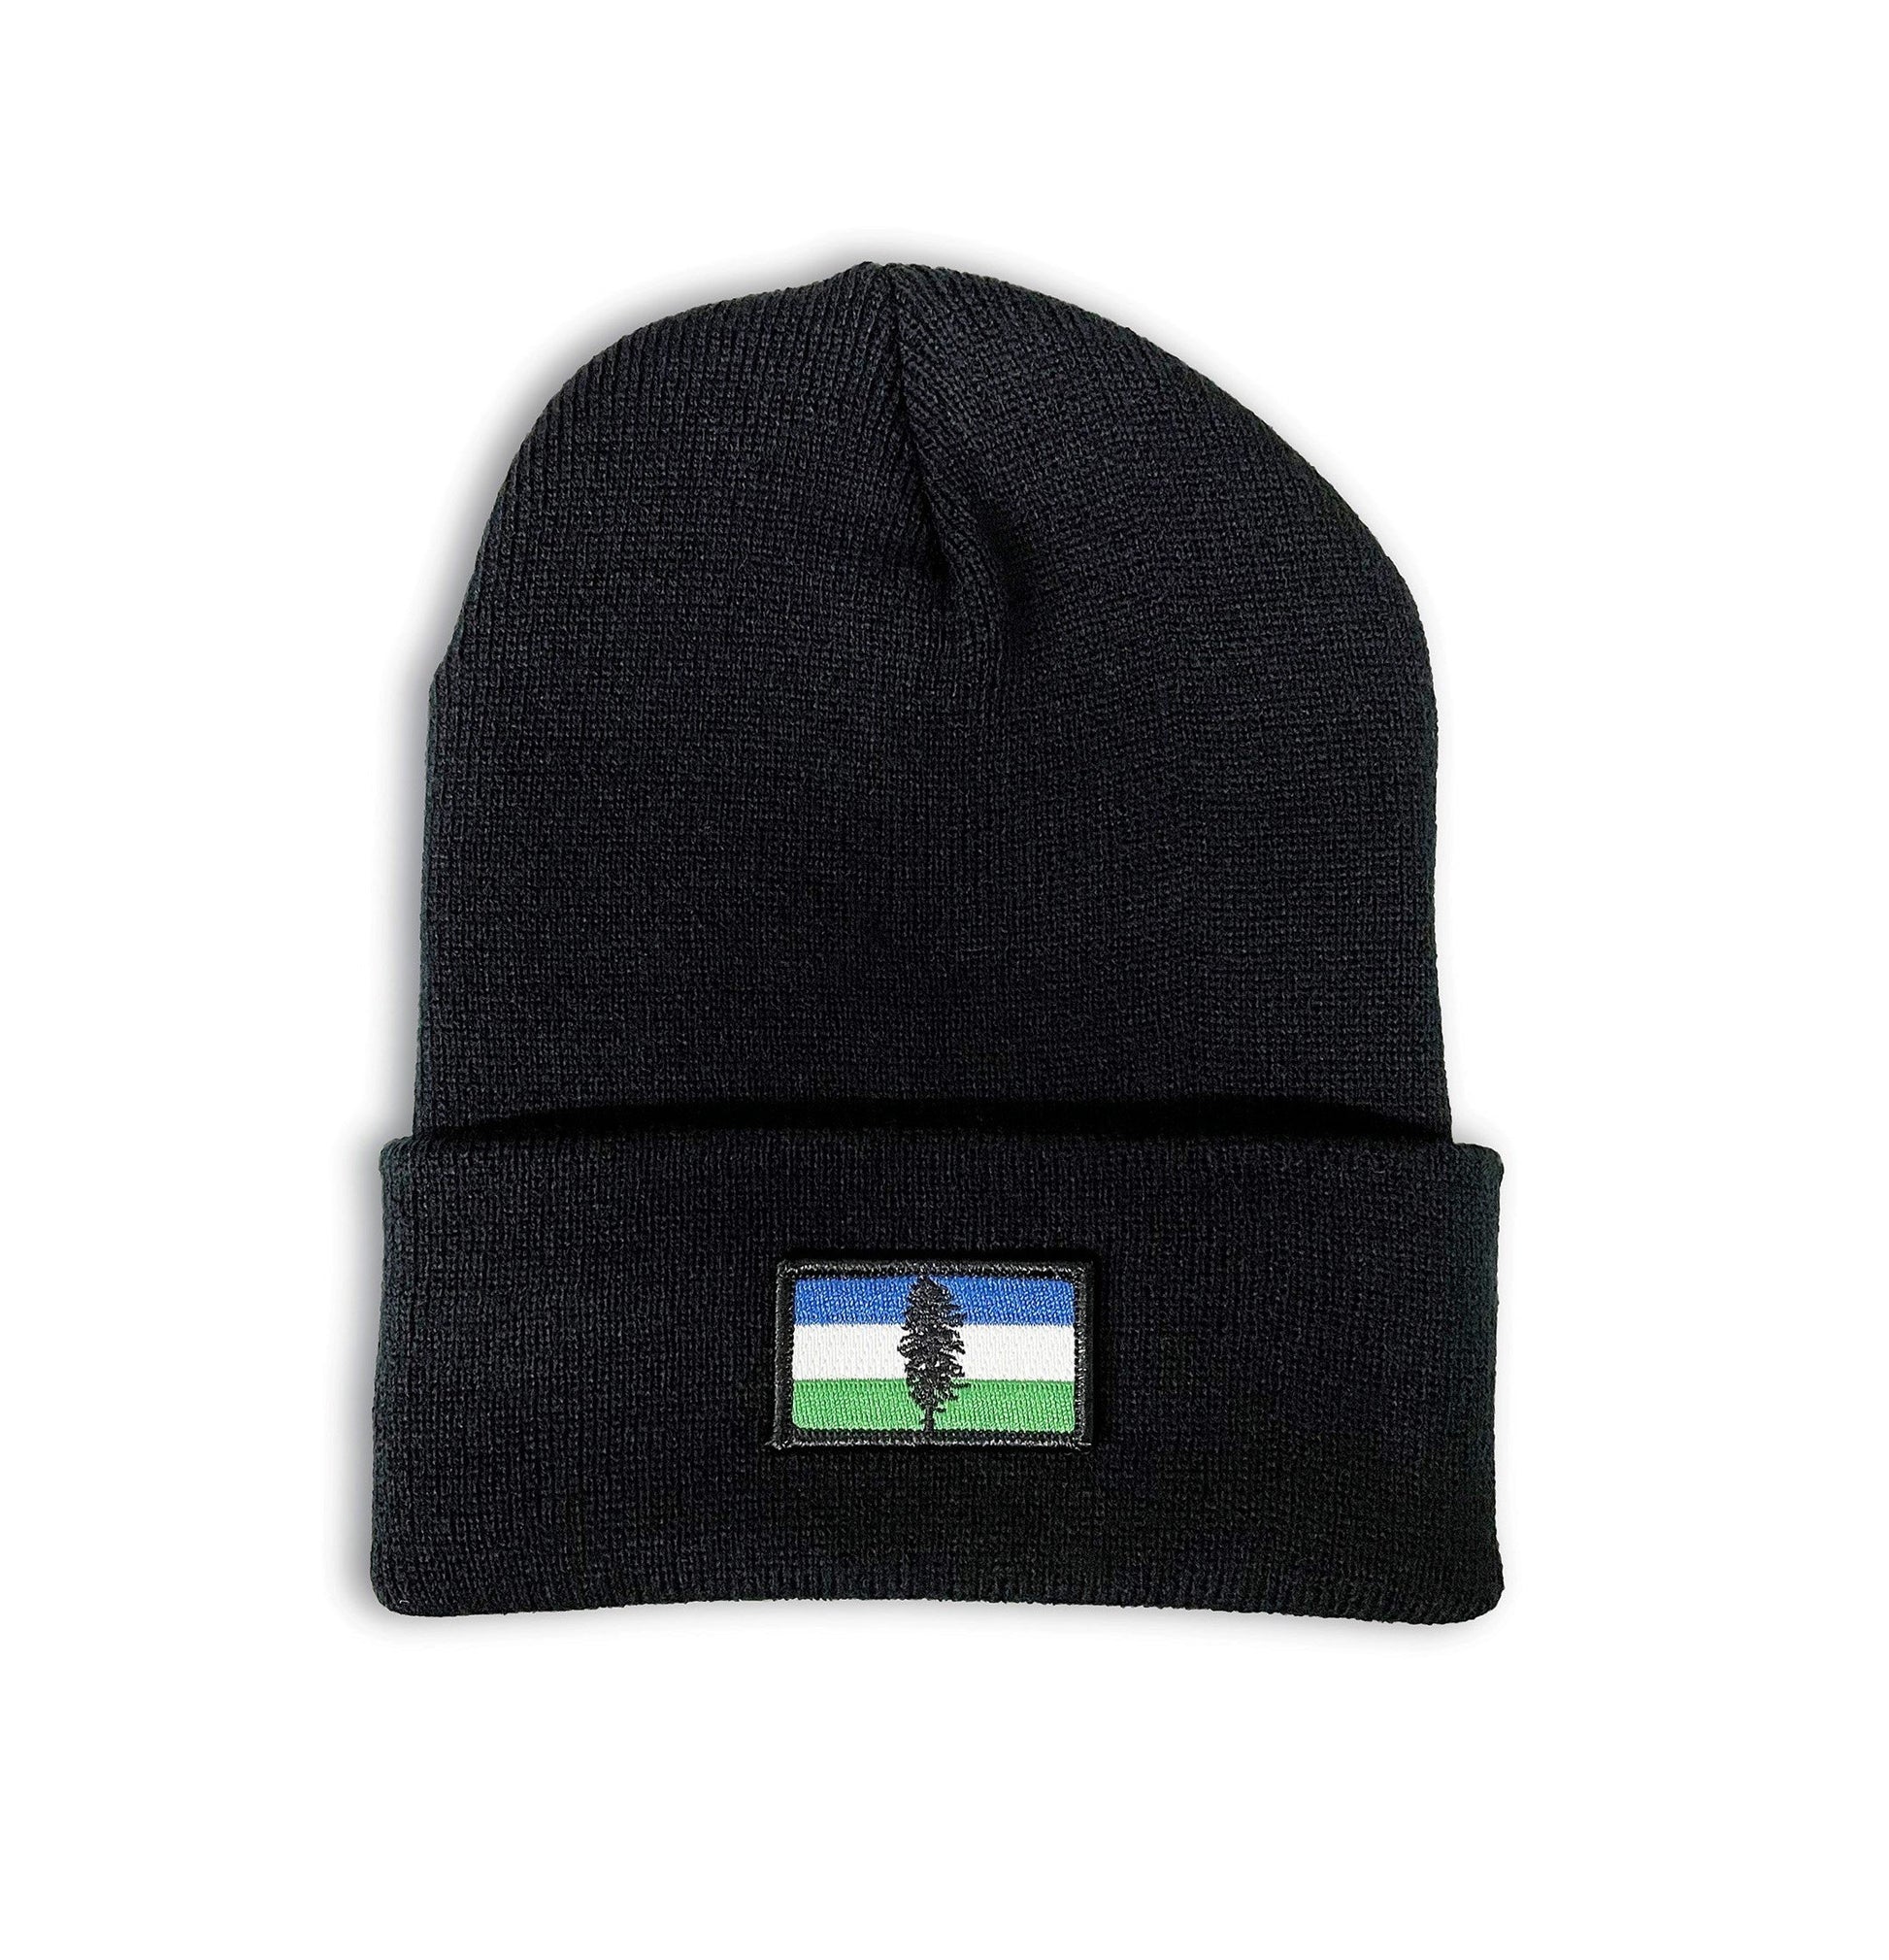 NW Vibes Cascadia Beanie - Black front